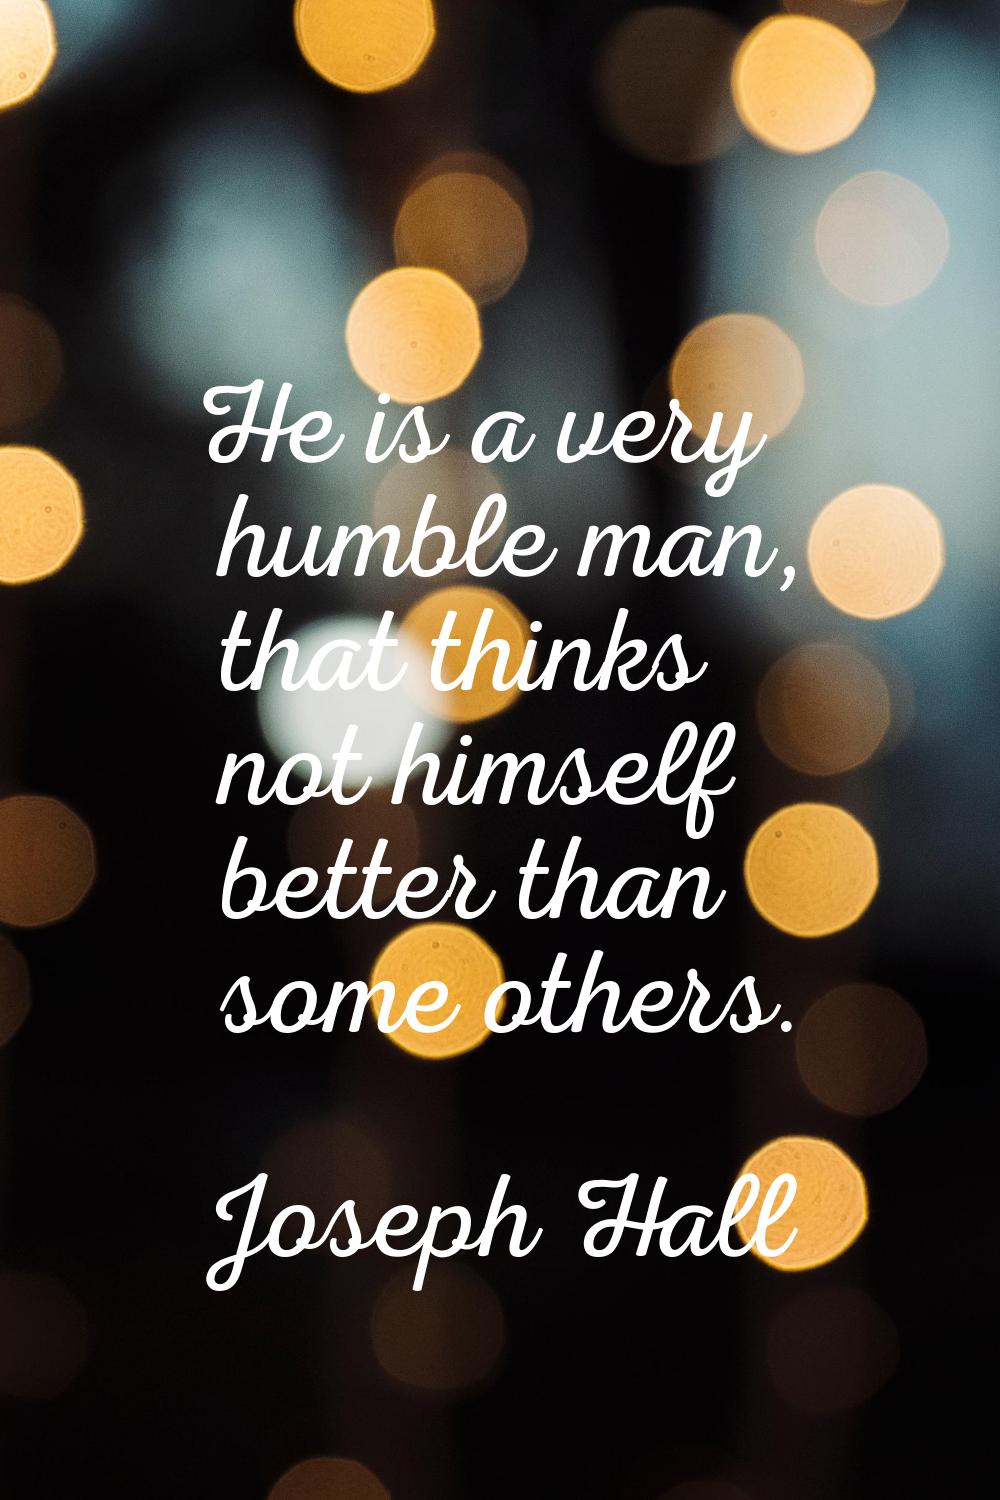 He is a very humble man, that thinks not himself better than some others.